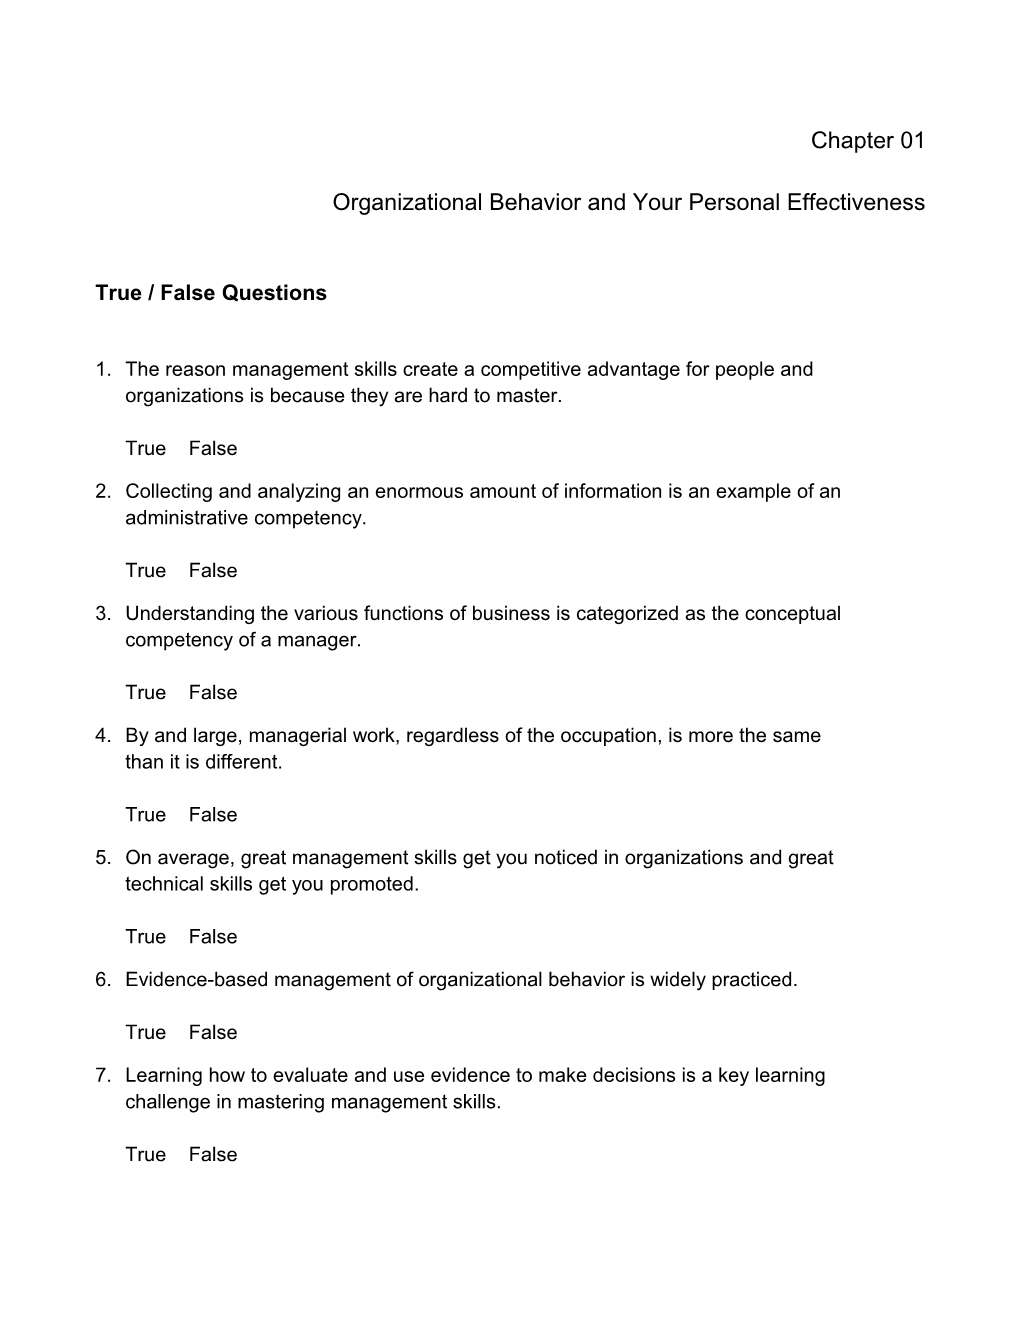 Organizational Behavior and Your Personal Effectiveness